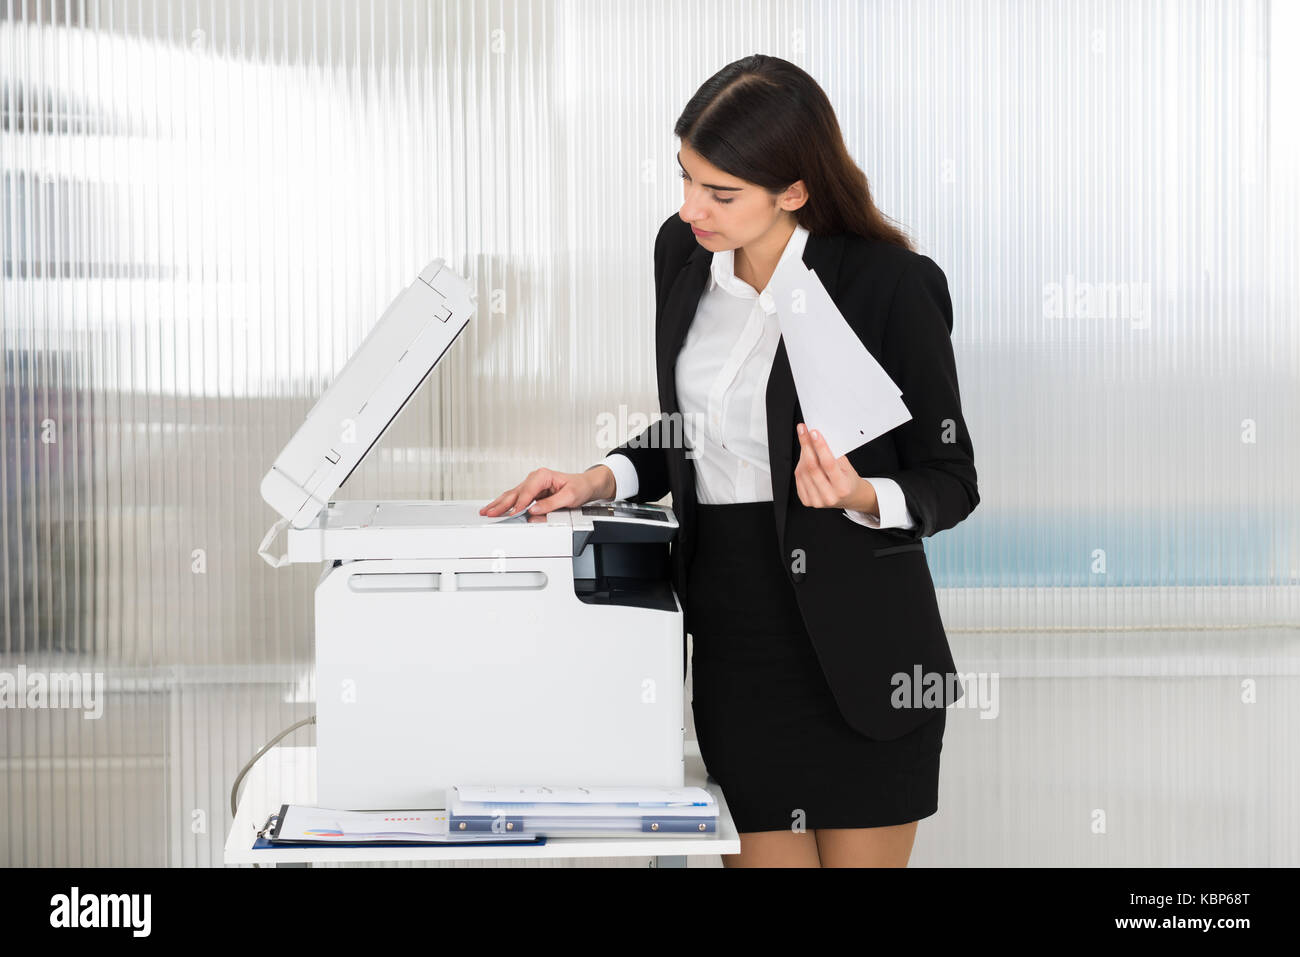 Young businesswoman using photocopy machine in office Stock Photo